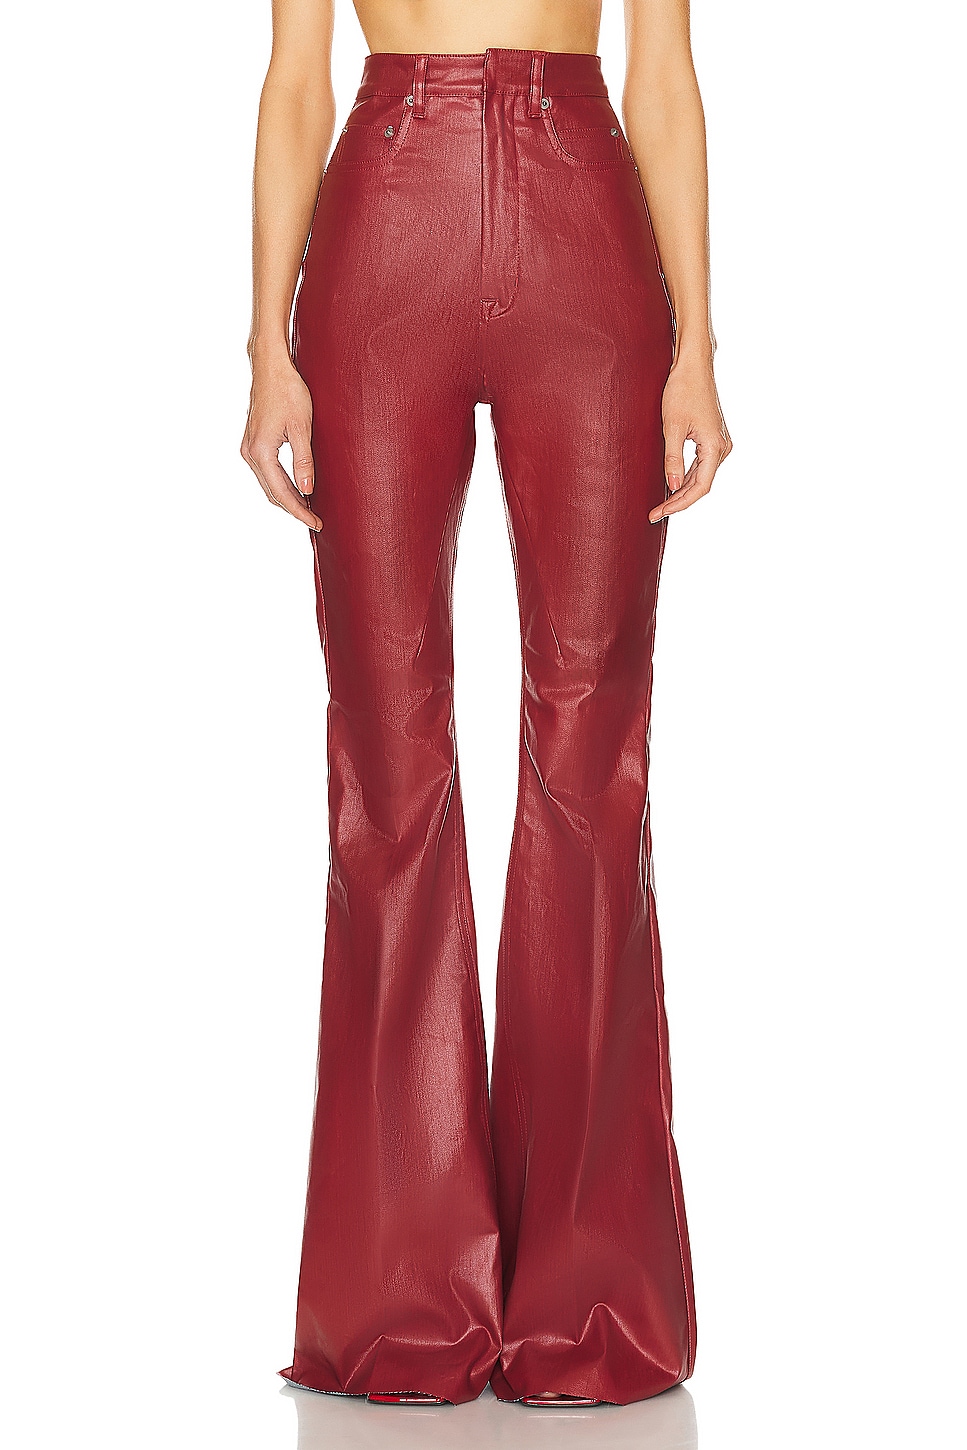 Image 1 of Rick Owens Bolan Bootcut Pants in Cardinal Red